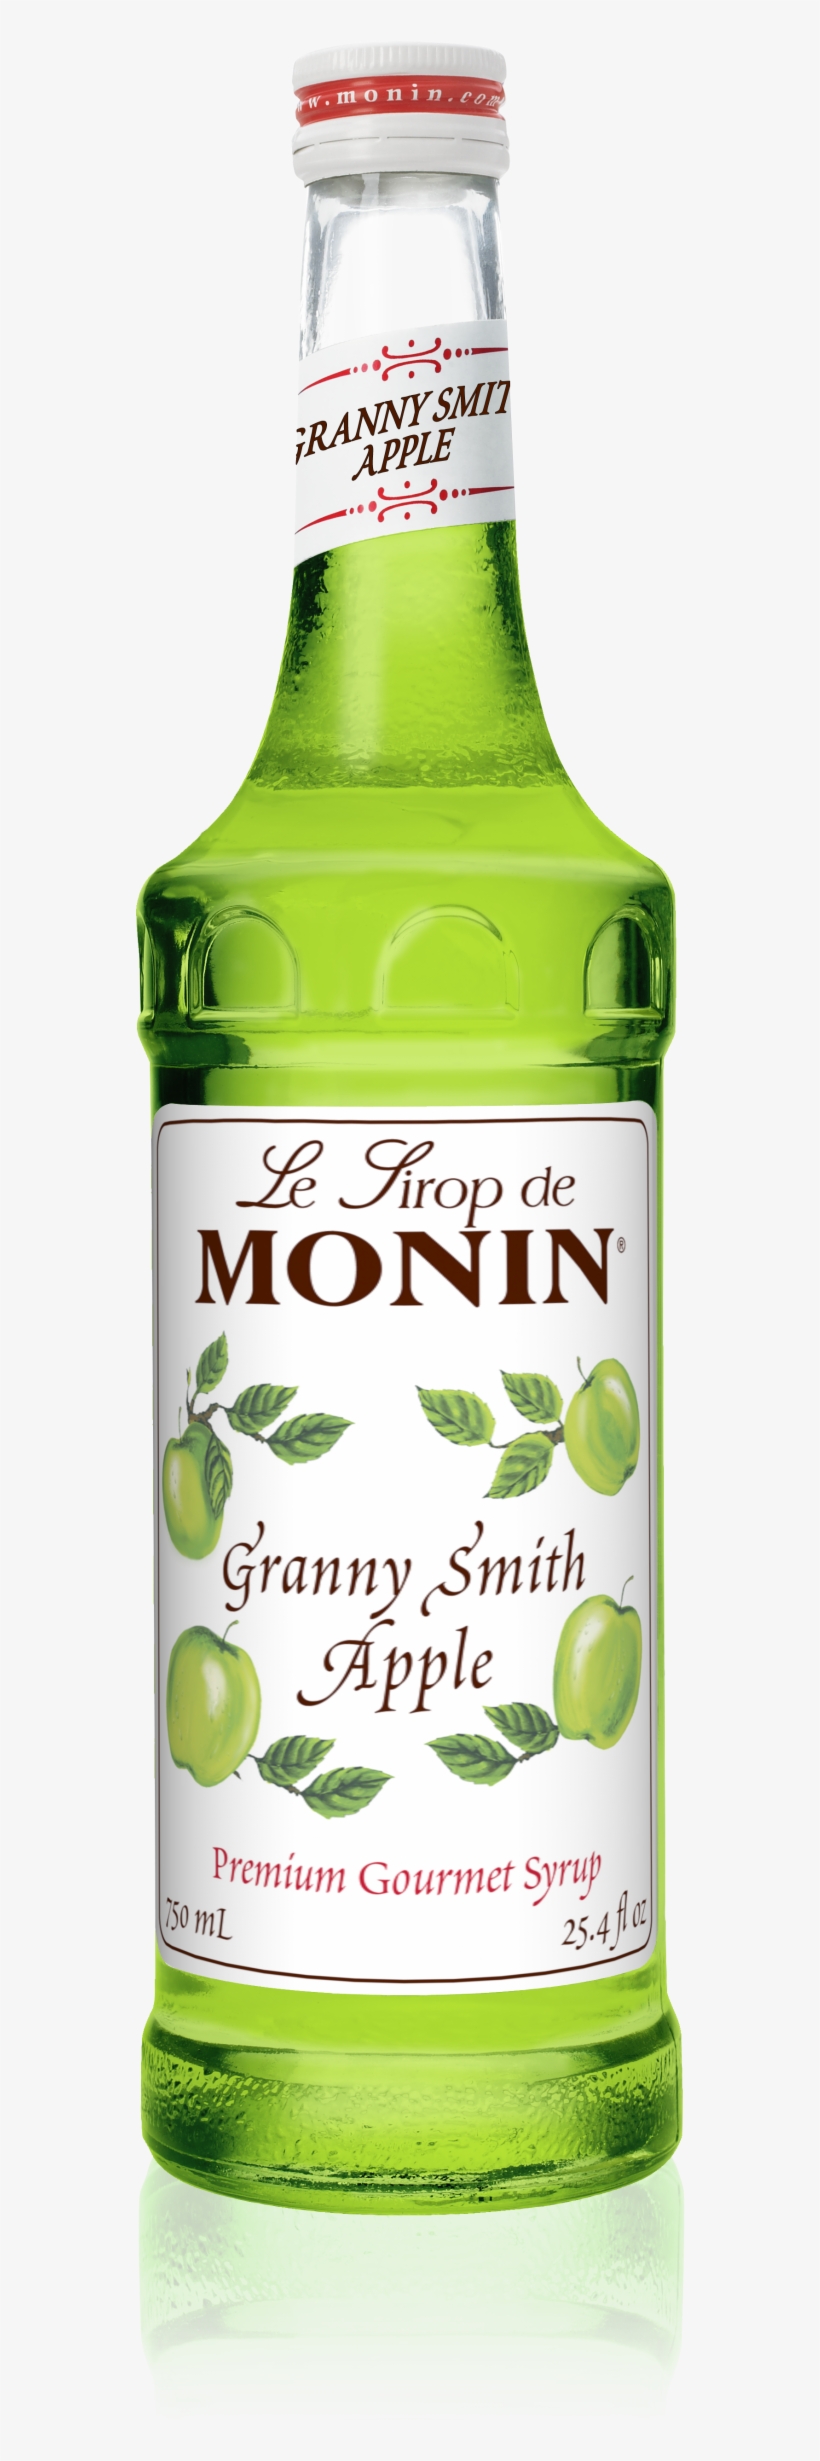 750 Ml Granny Smith Apple Syrup - Monin Apple Syrup, transparent png #3002171